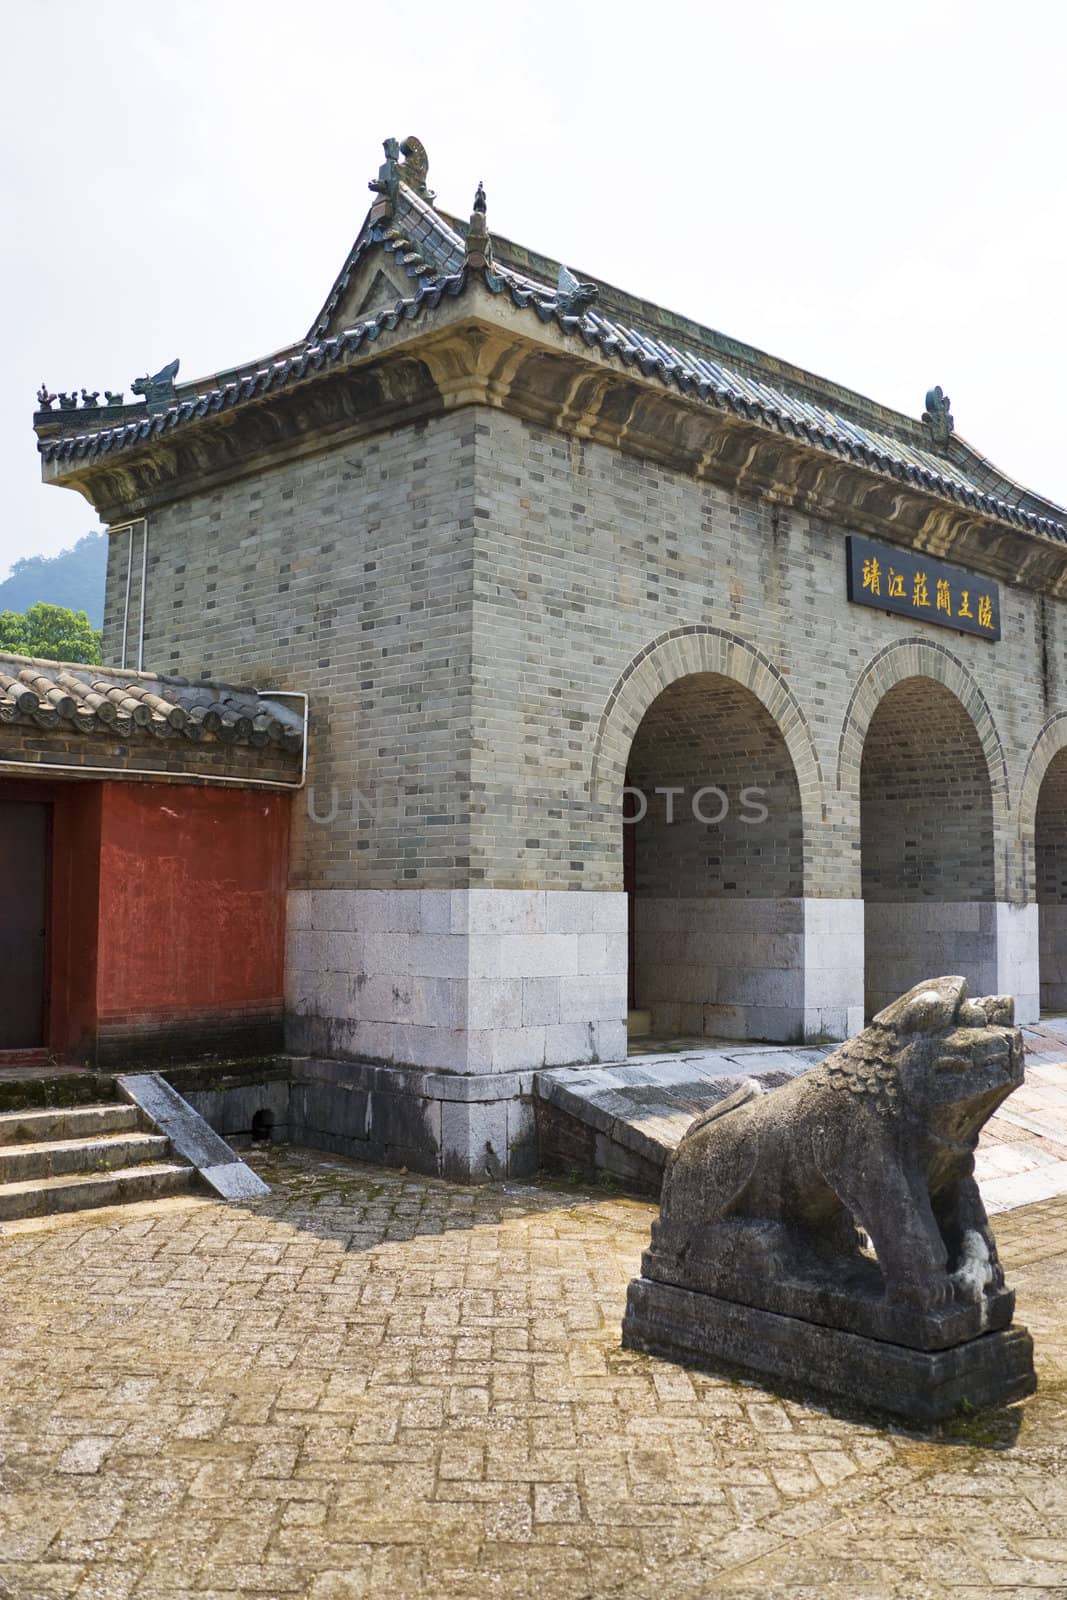 Image of the Jingjiang royal tombs at Guilin, China, an imperial mausoleum site where eleven princes who were descendants of the Ming emperor were buried.